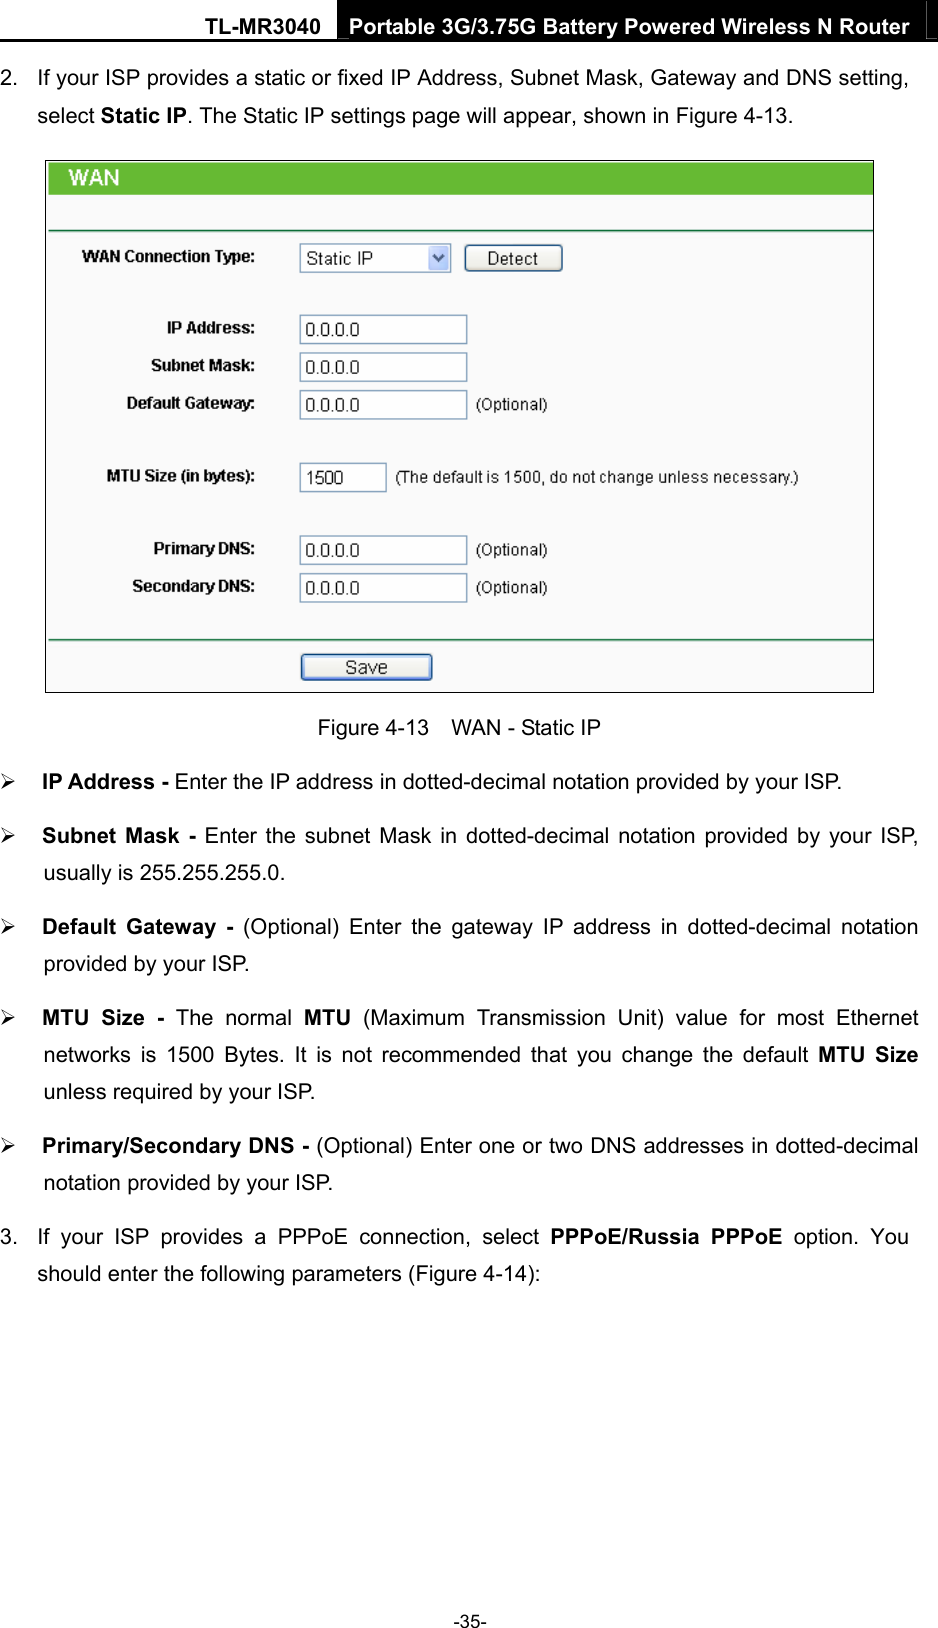 TL-MR3040  Portable 3G/3.75G Battery Powered Wireless N Router  2.  If your ISP provides a static or fixed IP Address, Subnet Mask, Gateway and DNS setting, select Static IP. The Static IP settings page will appear, shown in Figure 4-13.  Figure 4-13    WAN - Static IP ¾ IP Address - Enter the IP address in dotted-decimal notation provided by your ISP. ¾ Subnet Mask - Enter the subnet Mask in dotted-decimal notation provided by your ISP, usually is 255.255.255.0. ¾ Default Gateway - (Optional) Enter the gateway IP address in dotted-decimal notation provided by your ISP. ¾ MTU Size - The normal MTU (Maximum Transmission Unit) value for most Ethernet networks is 1500 Bytes. It is not recommended that you change the default MTU Size unless required by your ISP. ¾ Primary/Secondary DNS - (Optional) Enter one or two DNS addresses in dotted-decimal notation provided by your ISP. 3.  If your ISP provides a PPPoE connection, select PPPoE/Russia PPPoE option. You should enter the following parameters (Figure 4-14): -35- 